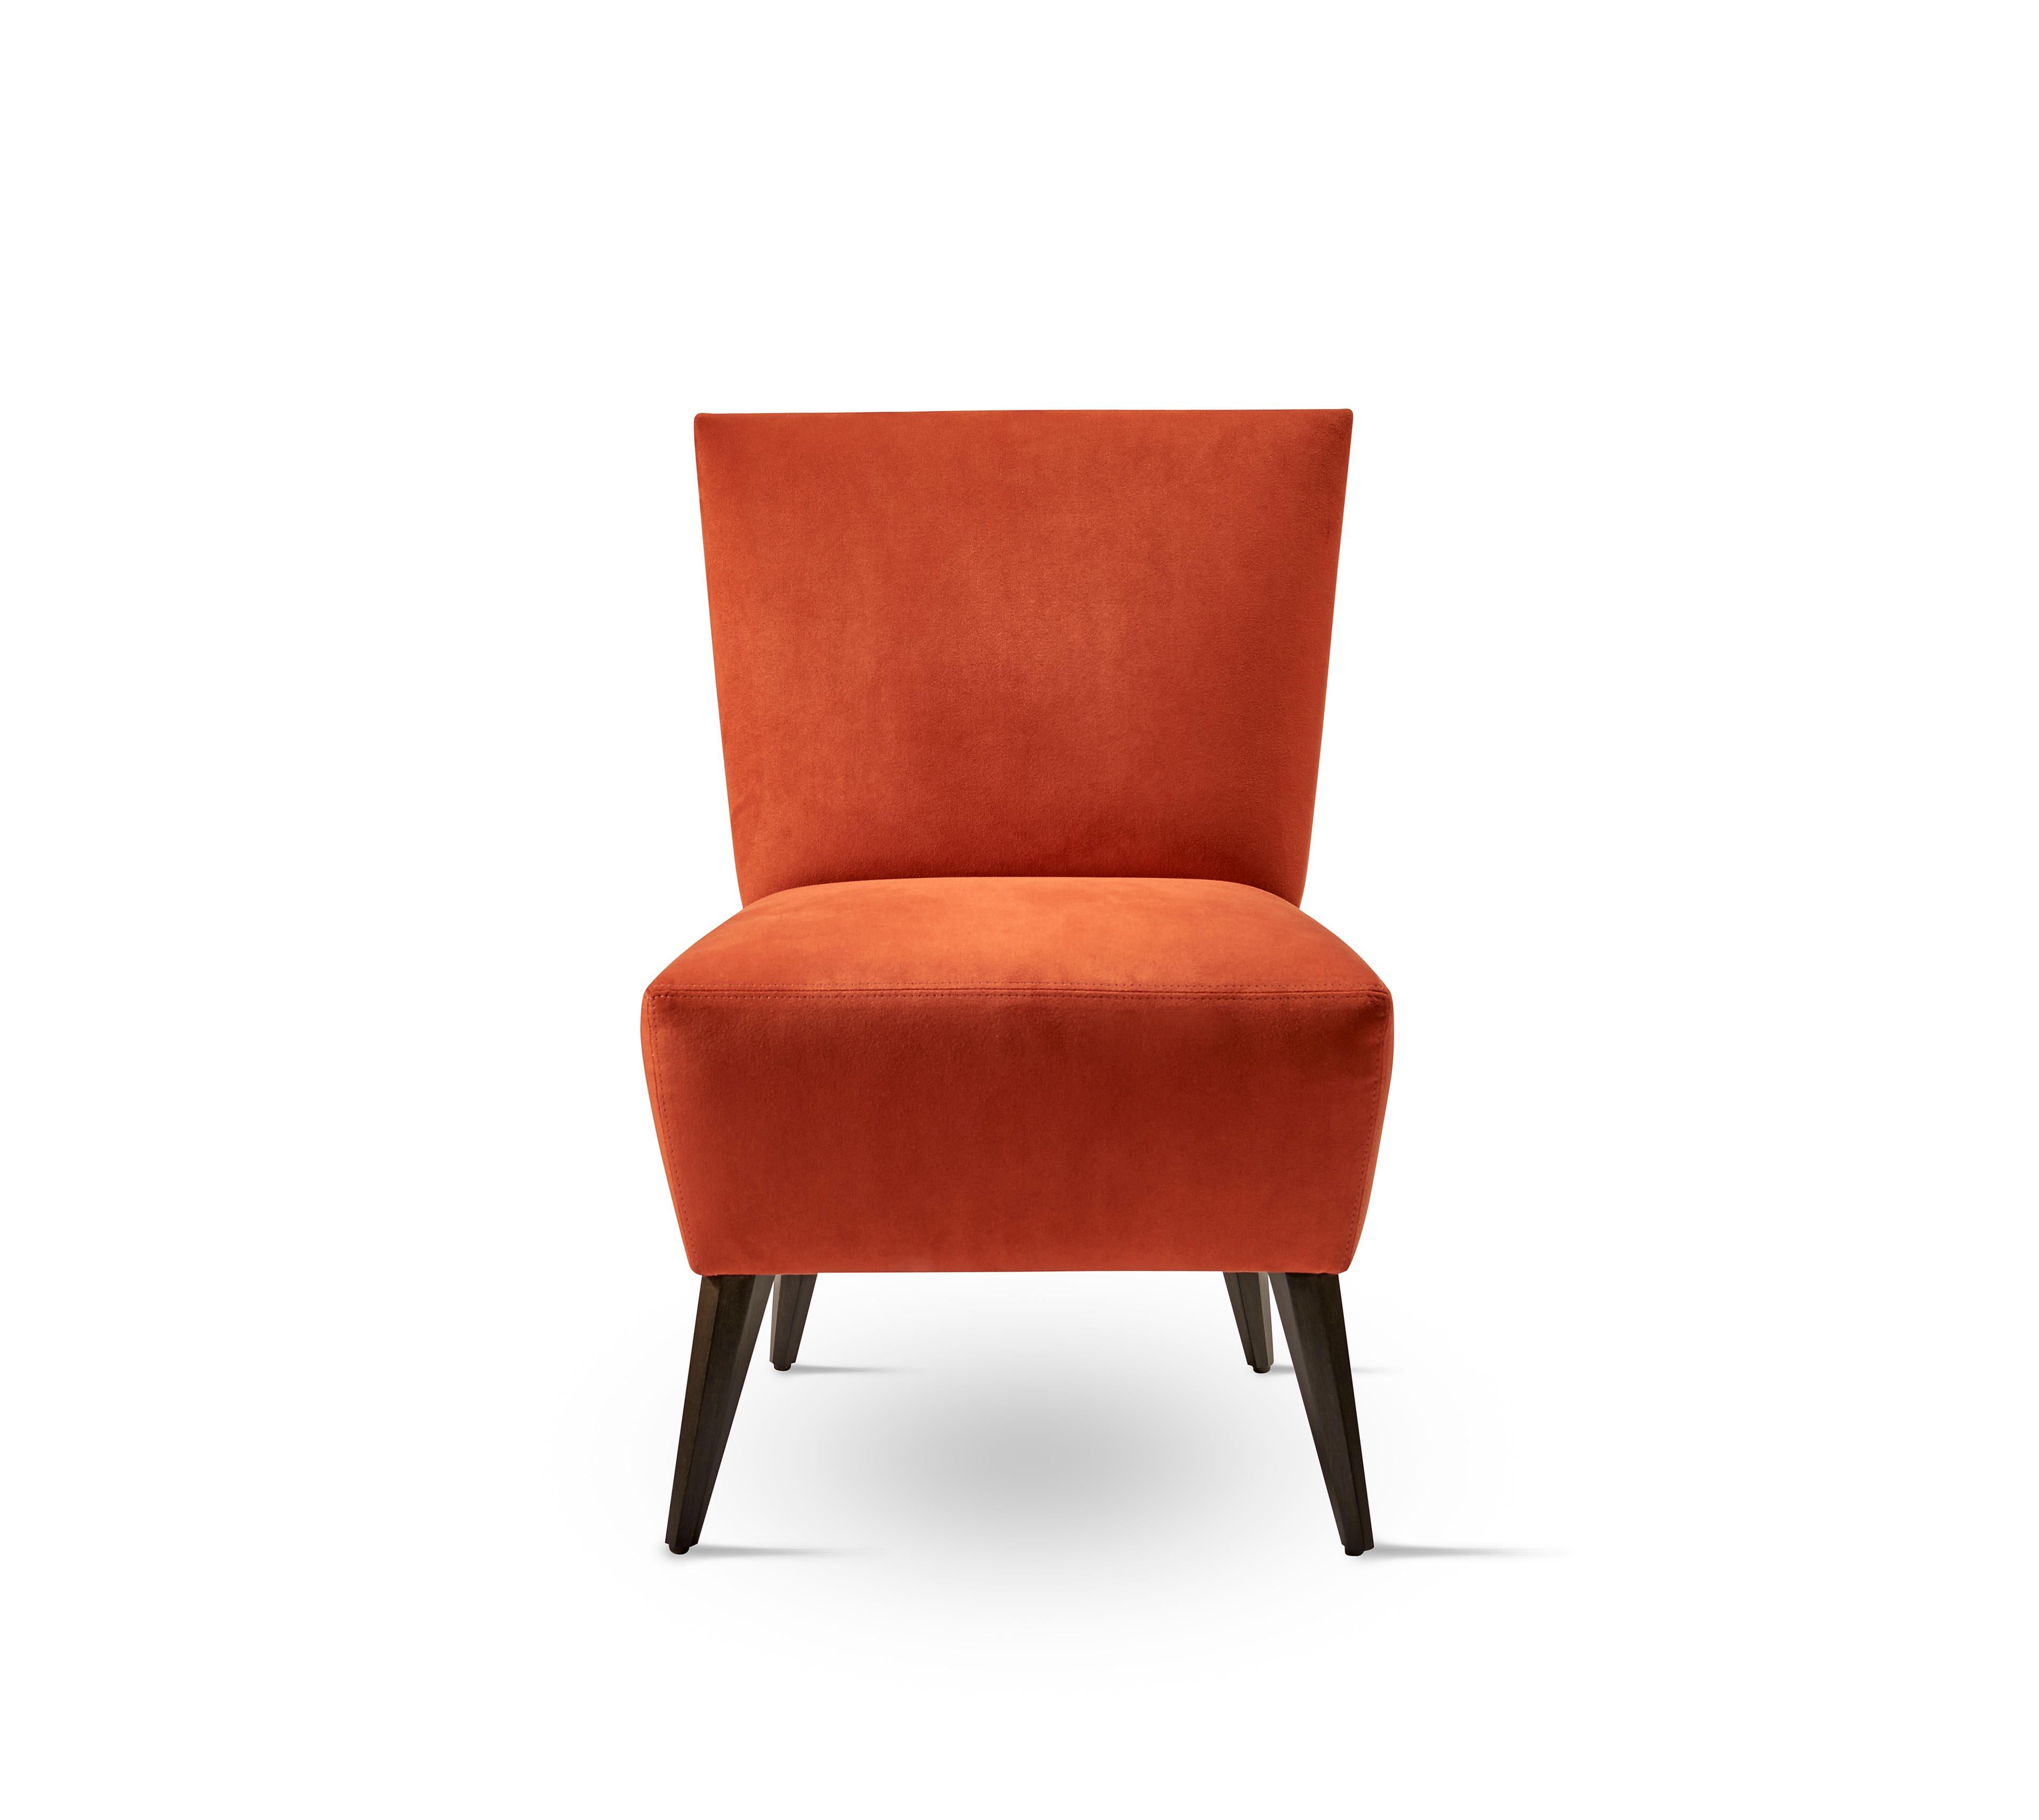 Contemporary upholstered chair
Wood: Maple
Dimensions: 22.5